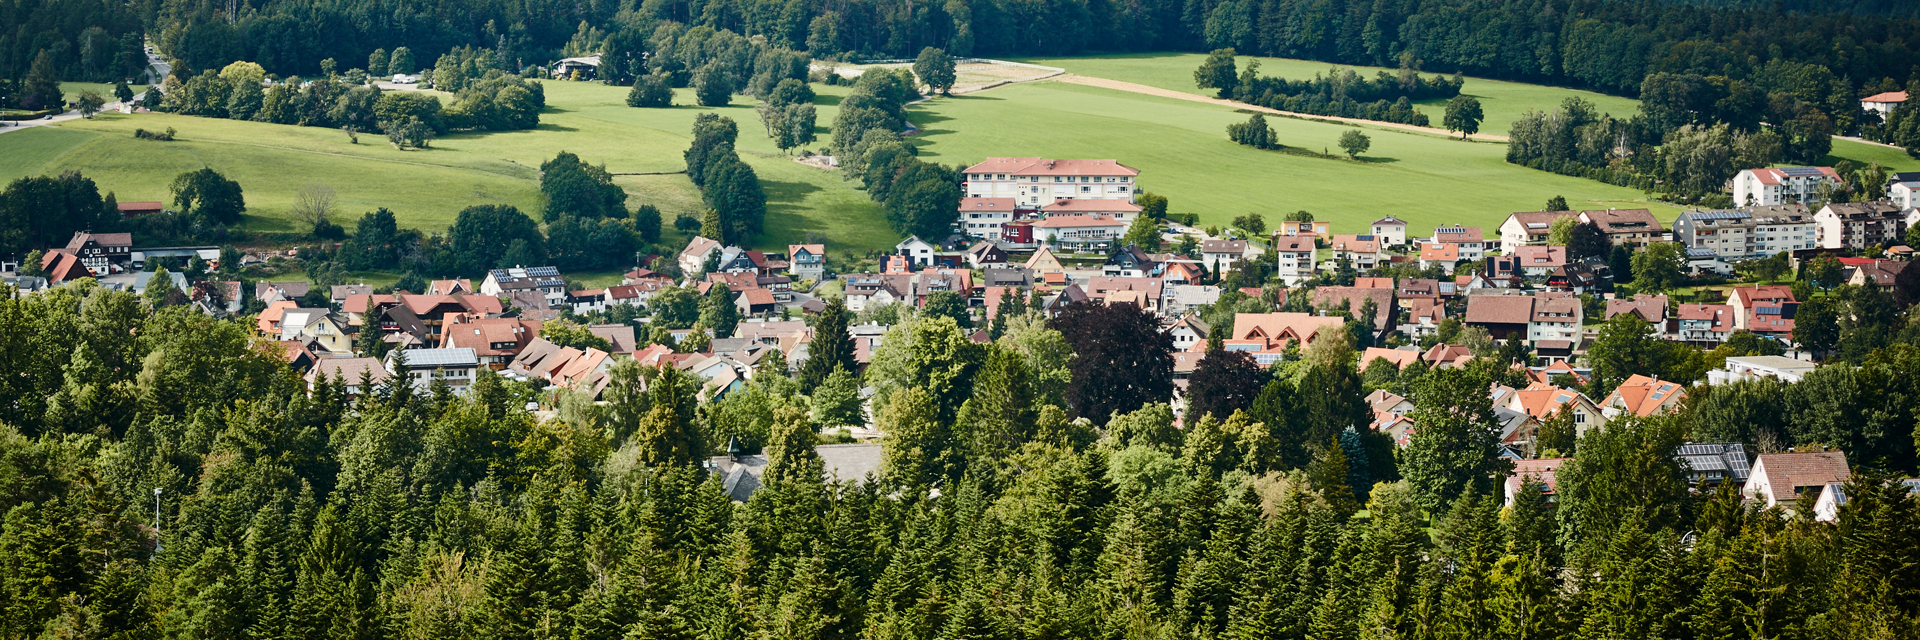 Photo: The building of the Schömberg Children's Hospital, embedded in nature and the village of Schömberg.